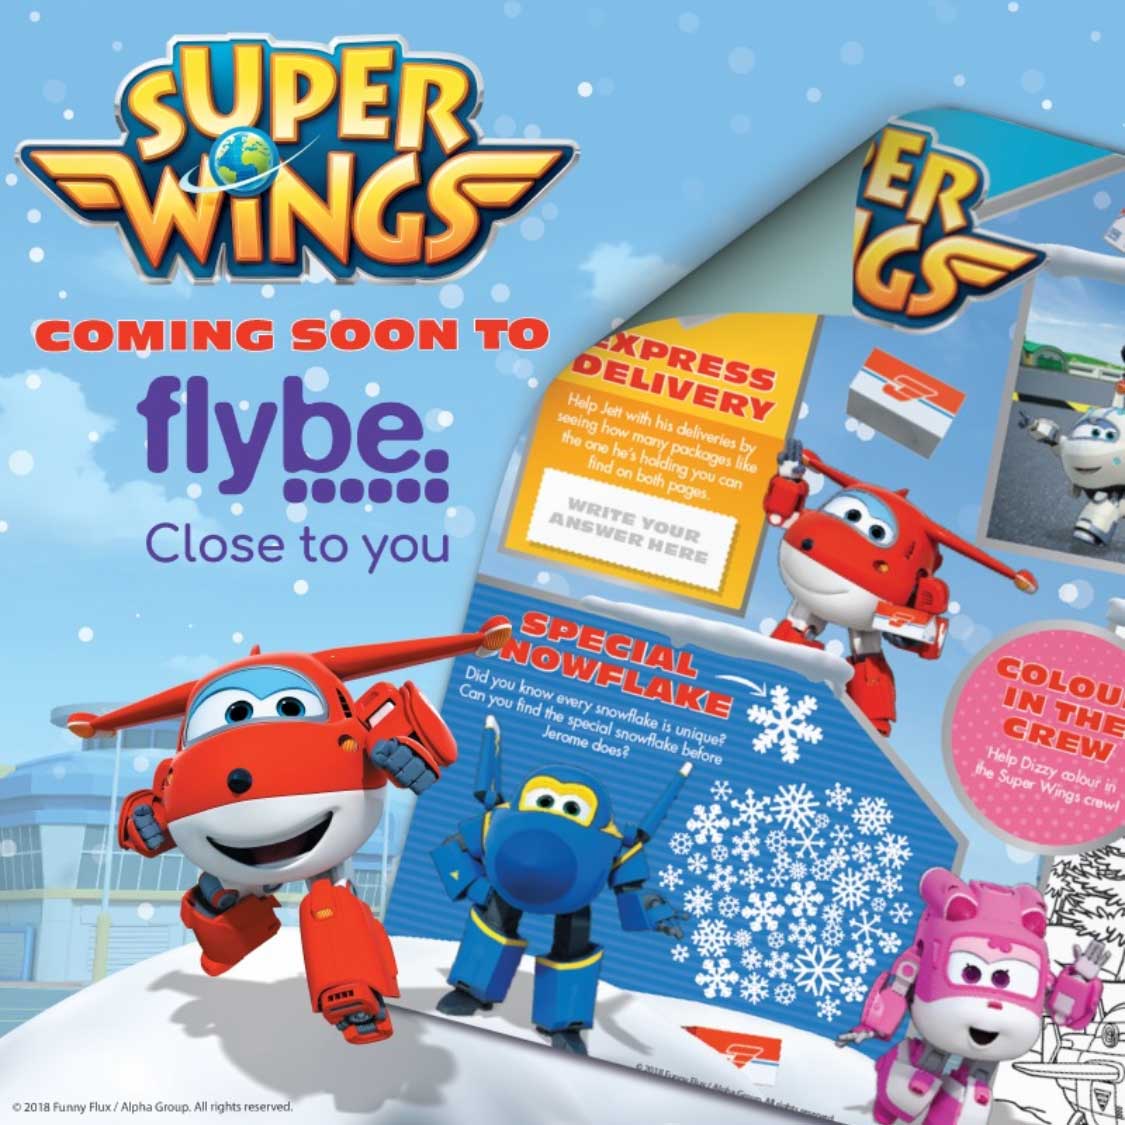 Flying High With Super Wings